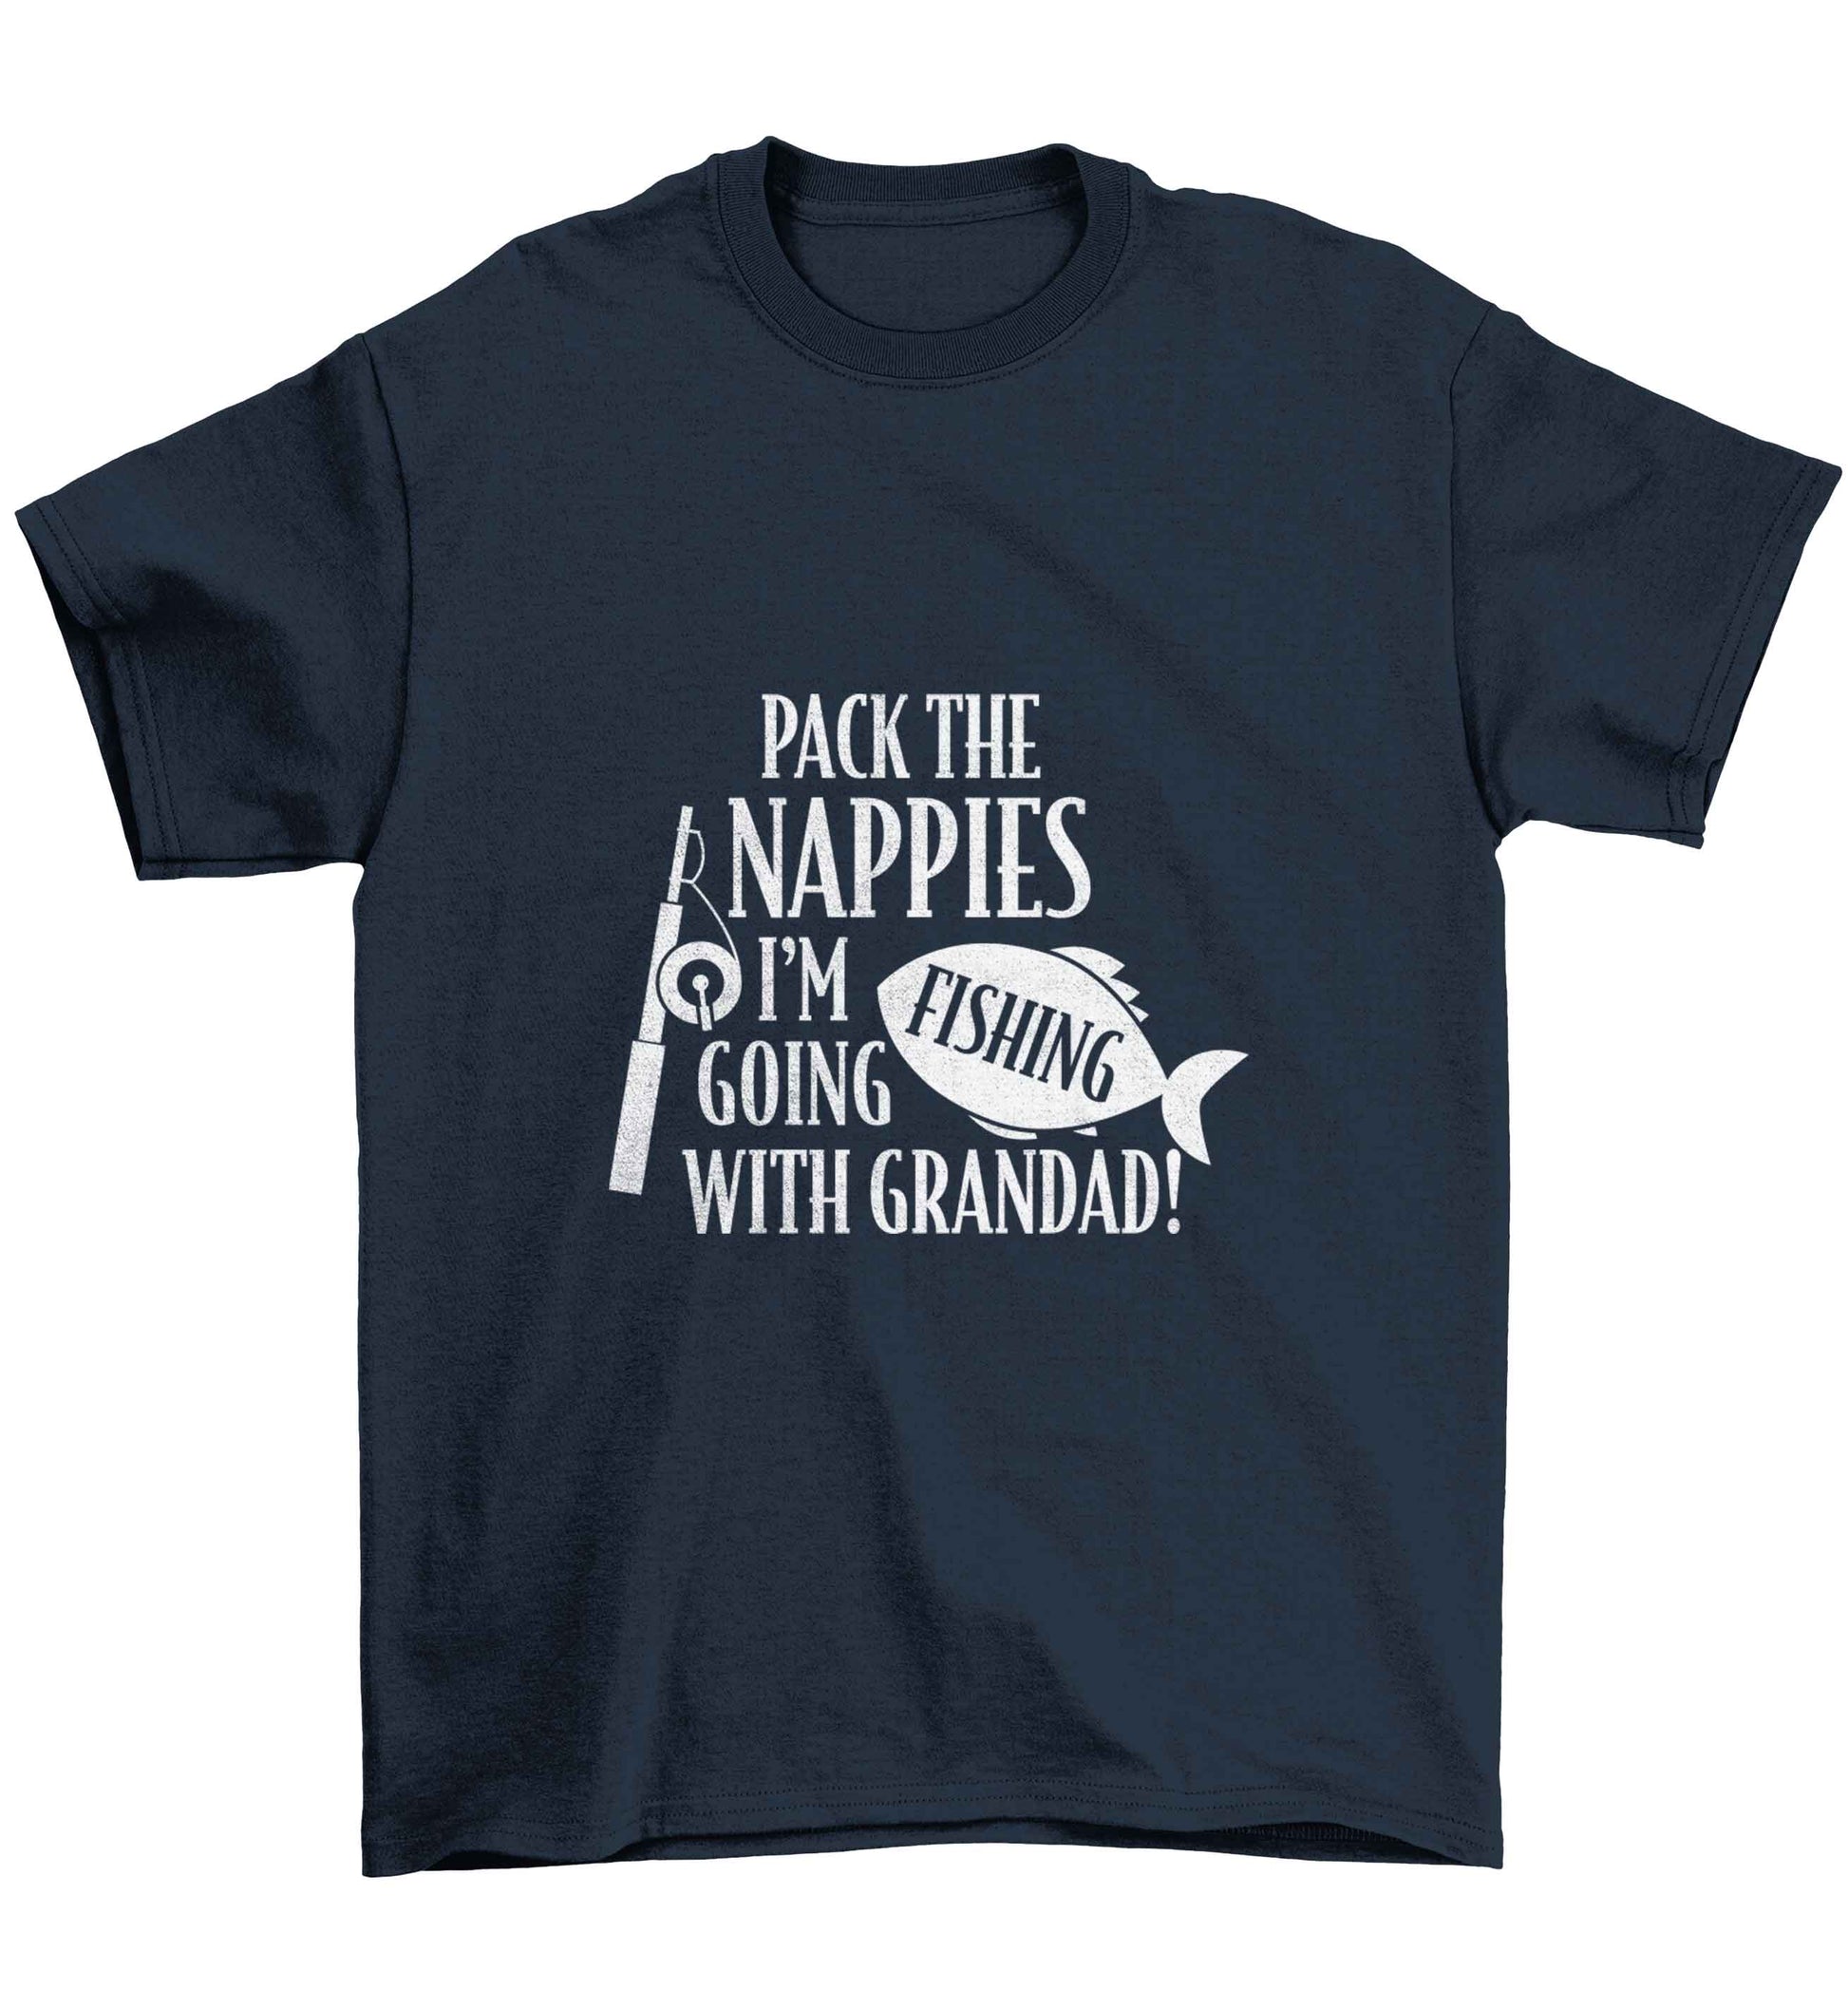 Pack the nappies I'm going fishing with Grandad Children's navy Tshirt 12-13 Years